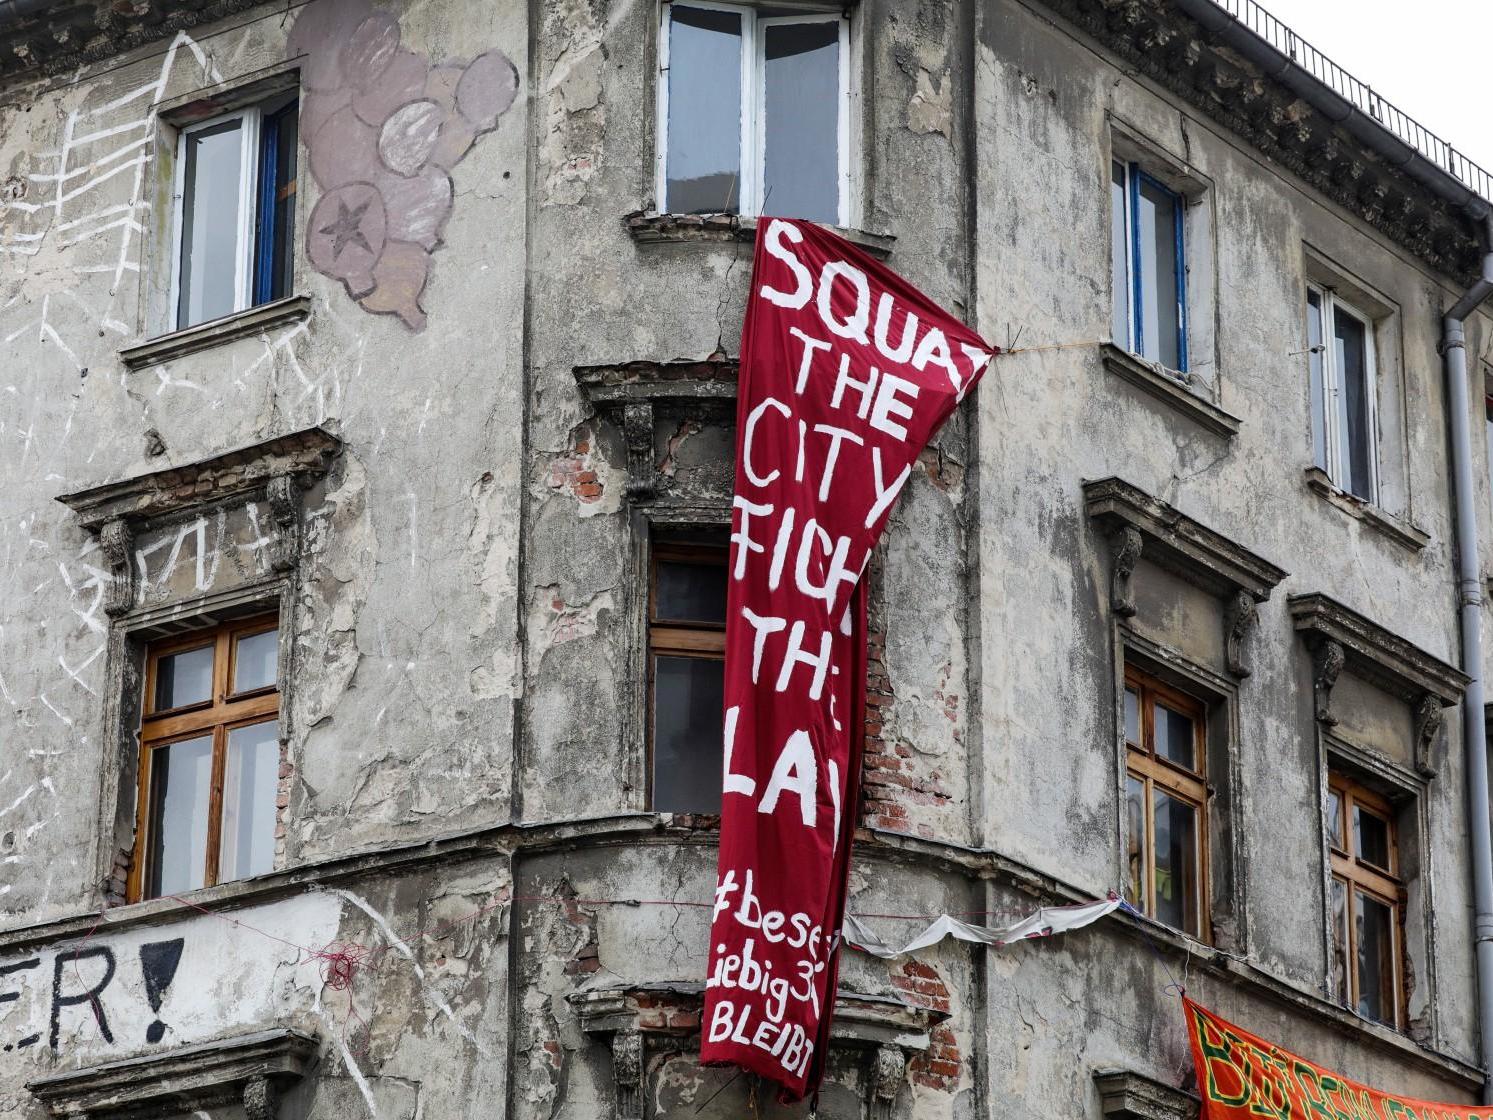 A banner reading 'Squat the city' hangs on an abandoned building in Berlin amid growing anger over the lack of affordable living space